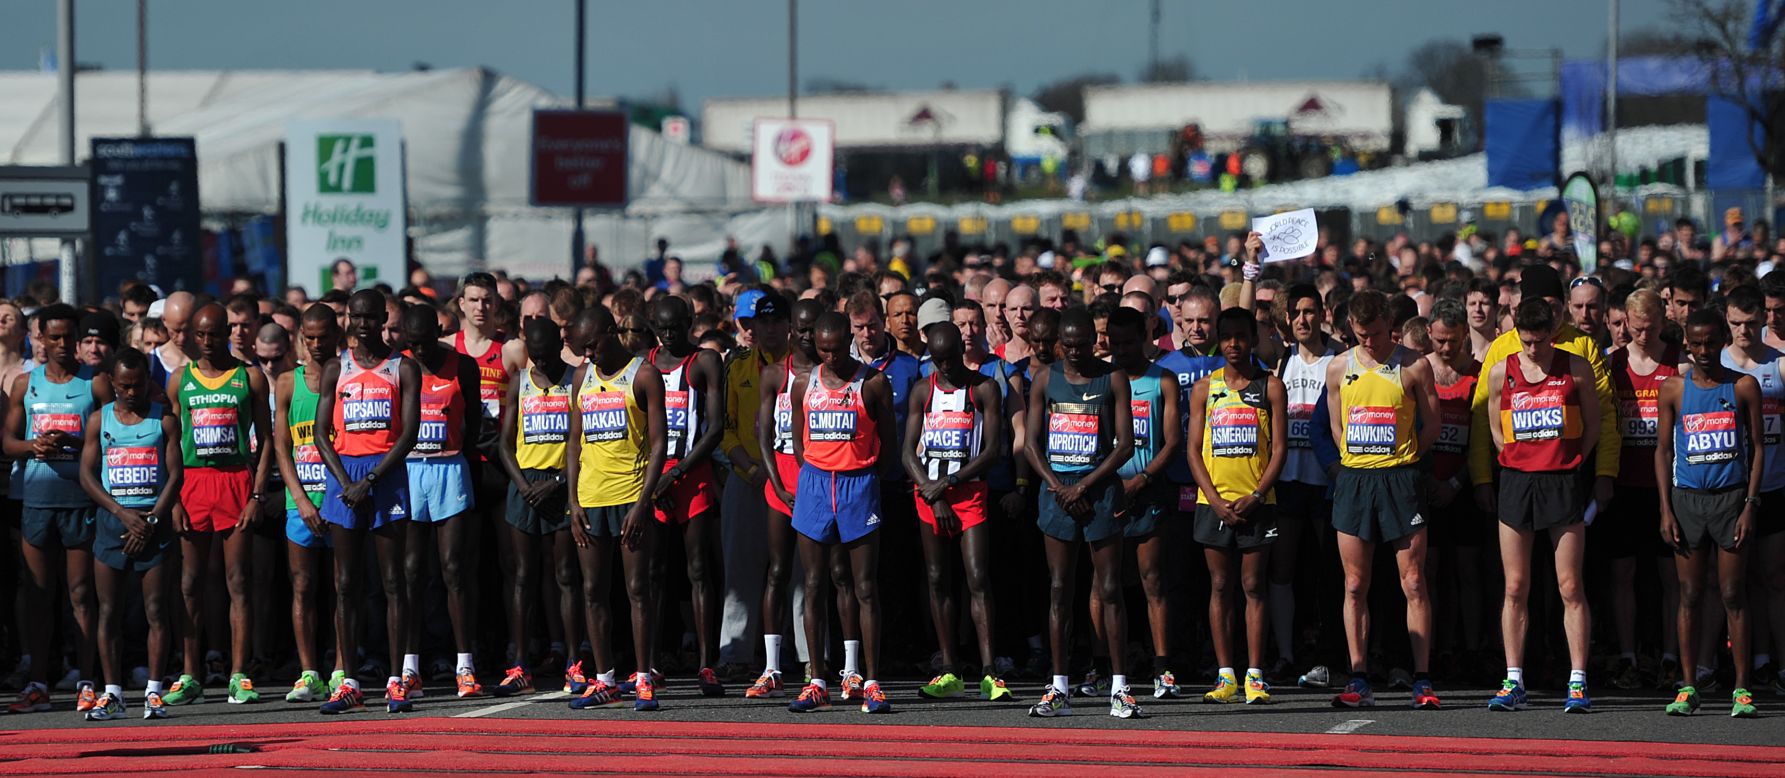 Runners in the men's elite race of the 2013 Virgin London Marathon observe 30 seconds of silence in honor of the victims of the Boston Marathon bombings before the start of the race in London on Sunday, April 21. People worldwide expressed their condolences after at least three people were killed and scores wounded in two explosions Monday near the finish line of the Boston Marathon. <a href="http://www.cnn.com/SPECIALS/us/boston-bombings-galleries/index.html">See all photography related to the Boston bombings.</a>